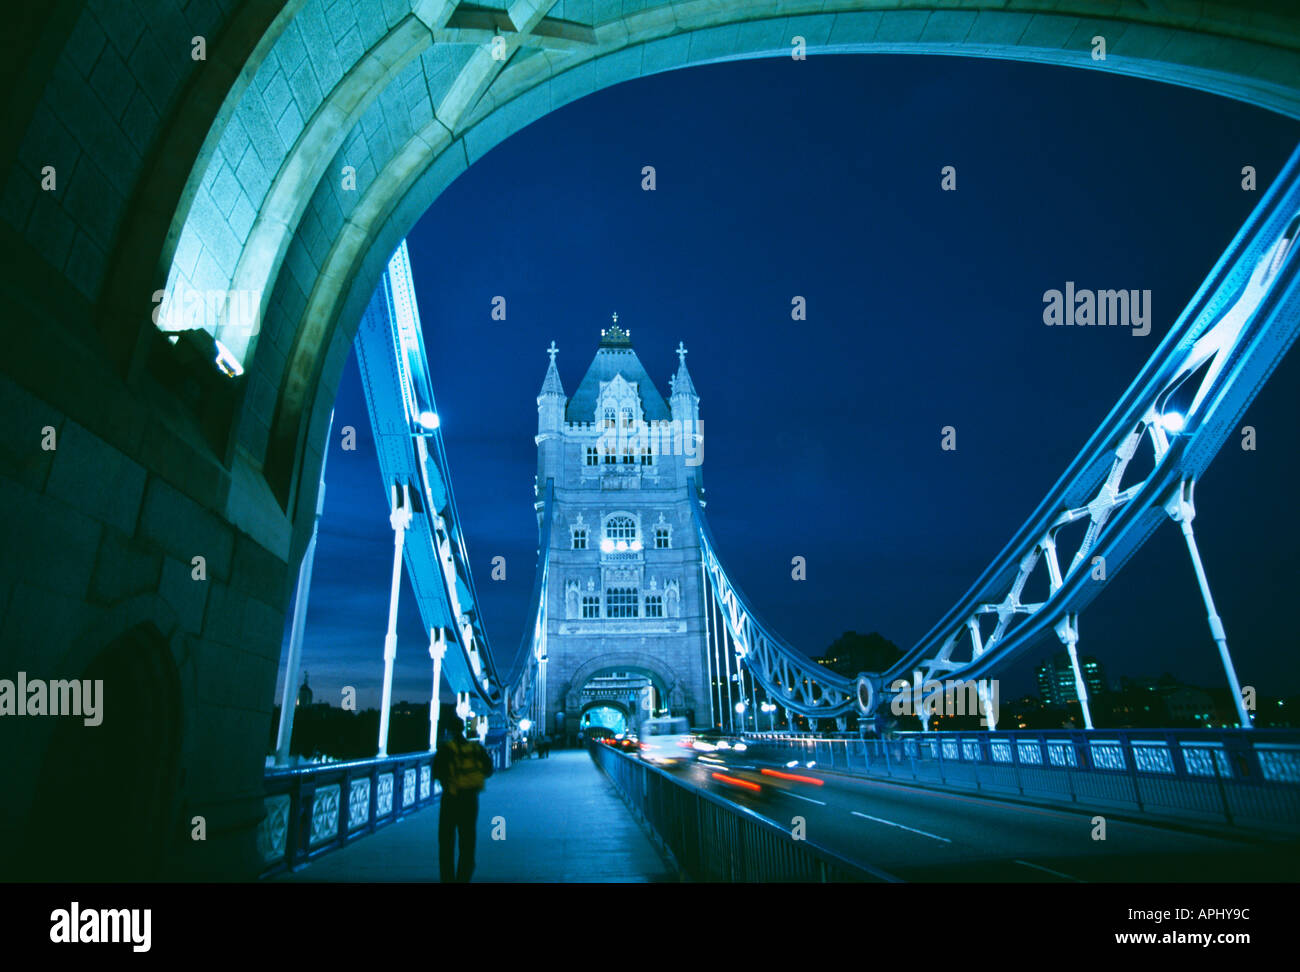 Night time view of Tower Bridge with traffic crossing London The architect Sir Horace Jones died in 1887 before the foundations were complete and the task passed to his assistant George Daniel Stevenson who had an even greater passion for Victorian Gothic style Opened in 1894 linking the Tower of London and the south bank across the River Thames The bridge opens to allow large river craft to pass underneath Stock Photo